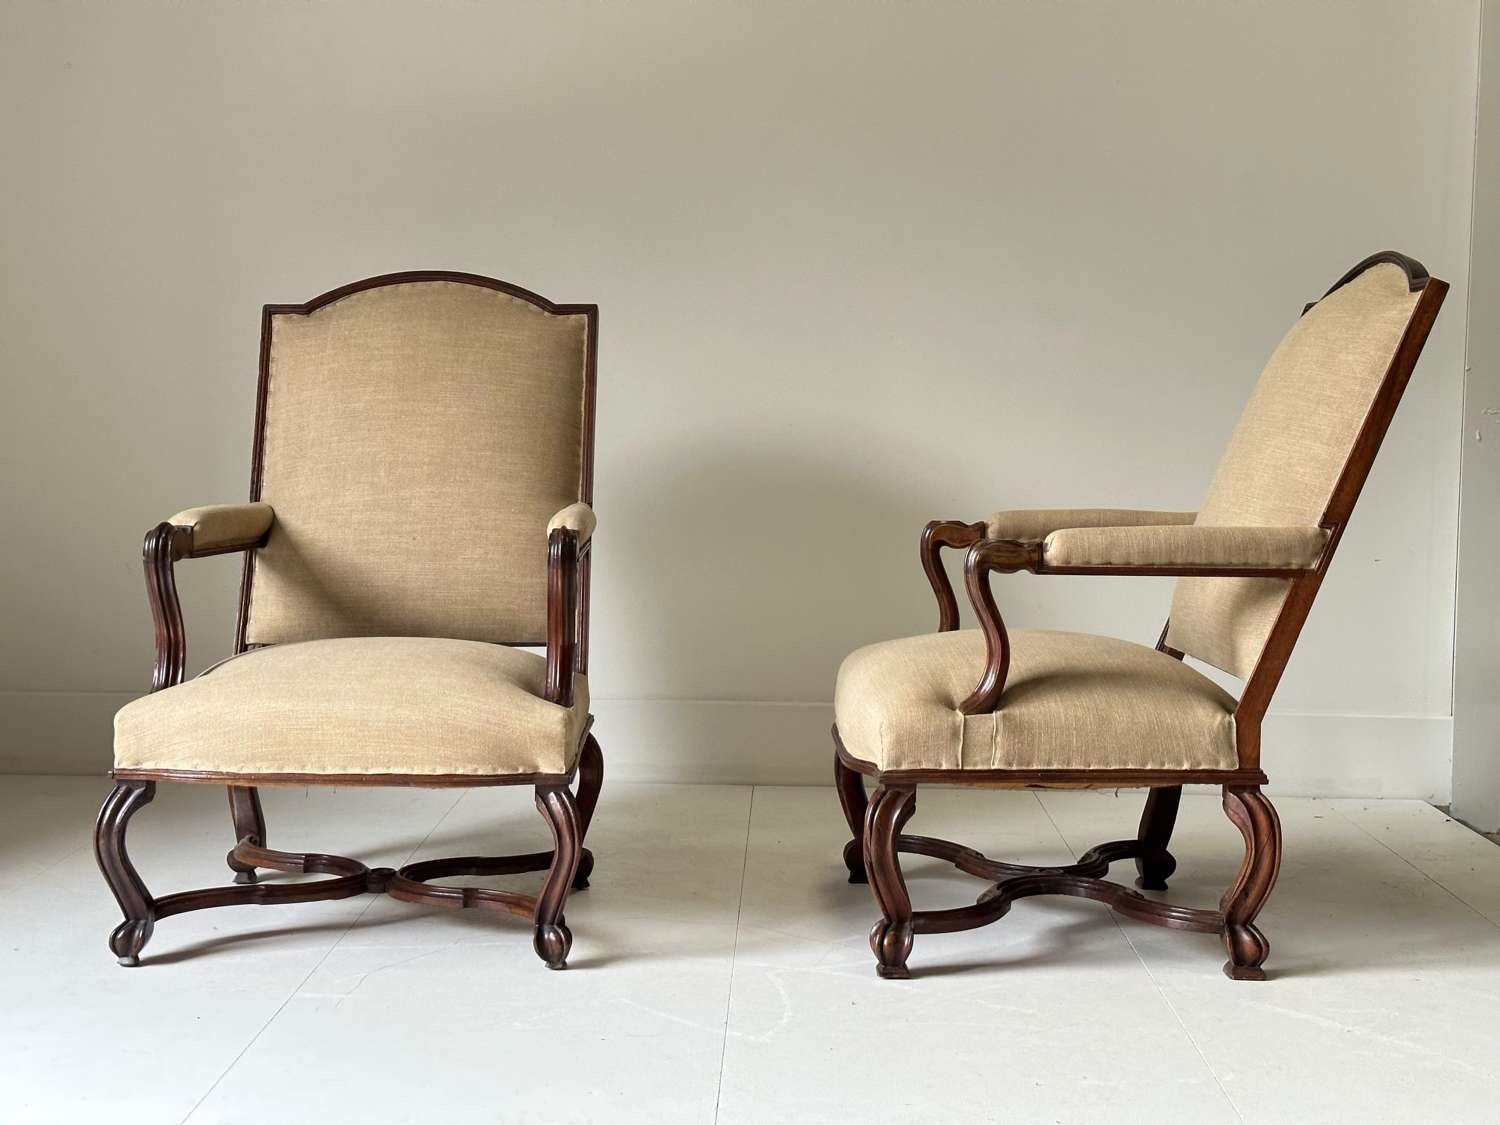 C1870 An Elegant Pair of French Open Armchairs